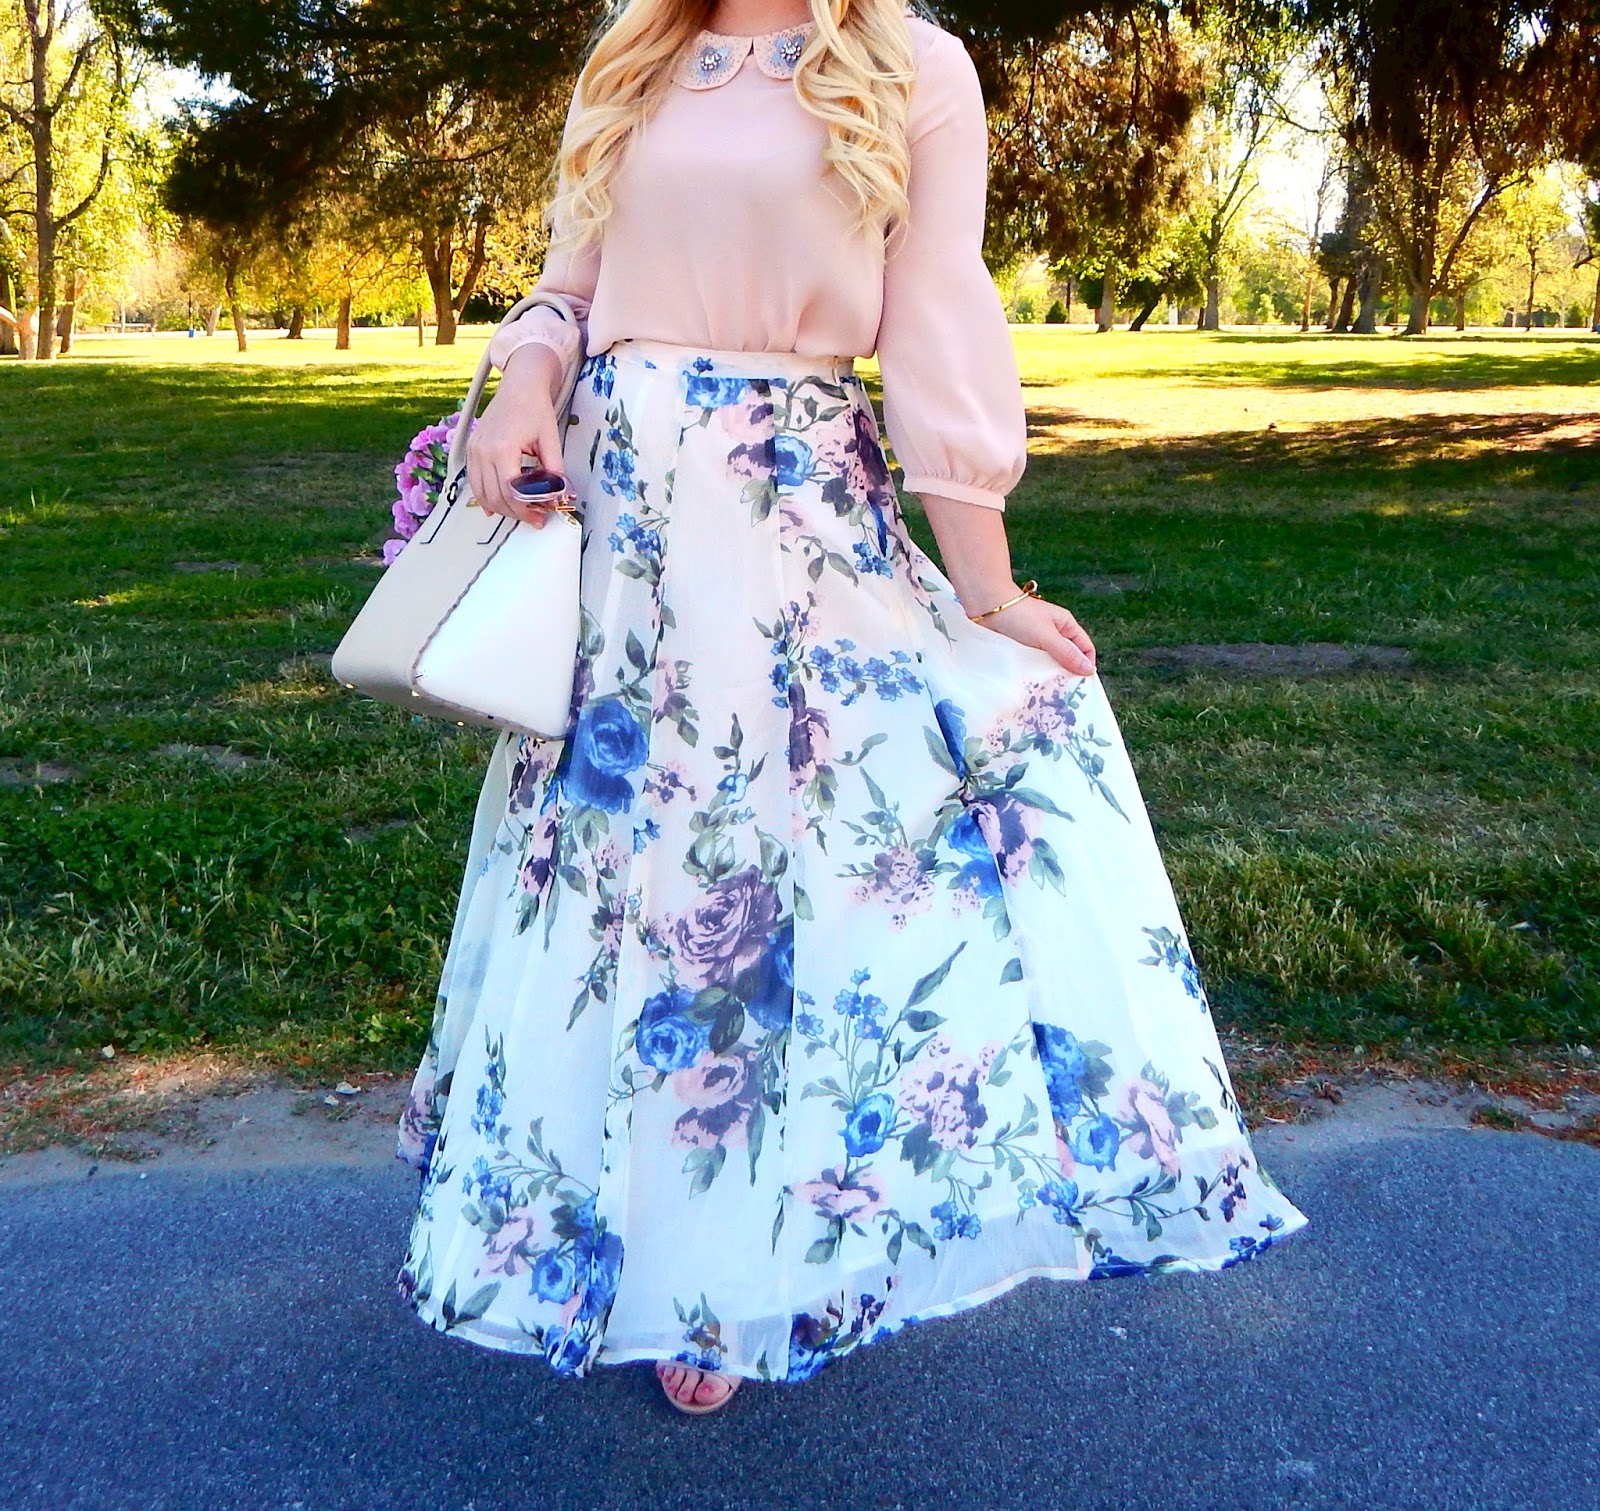 Girly Cinderella Inspired Outfit